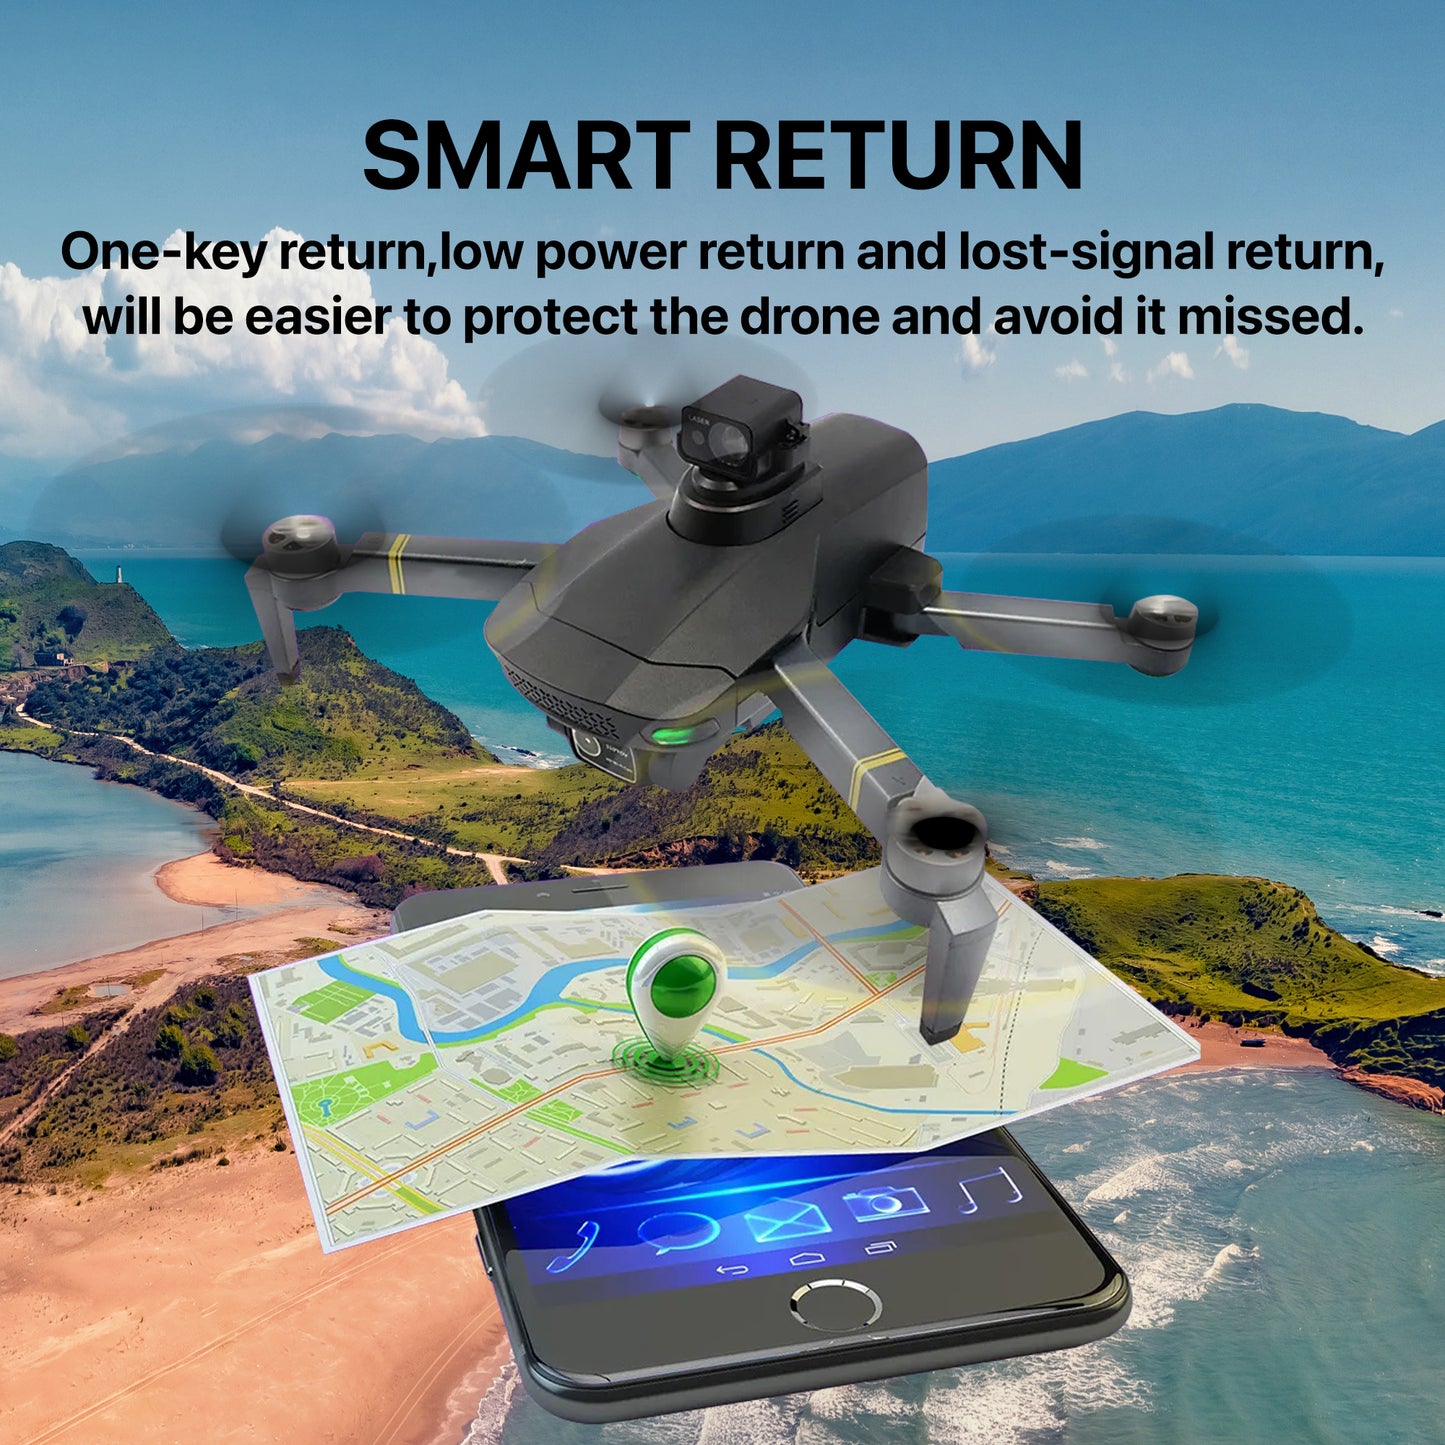 REFURBISHED: The Bigly Brothers Midnight Specter GPS Drone, 5 Directional Obstacle Avoidance, GPS Smart Return, 1km Range, Dual Camera 4k, Below 249 Grams, Carrying Case Included